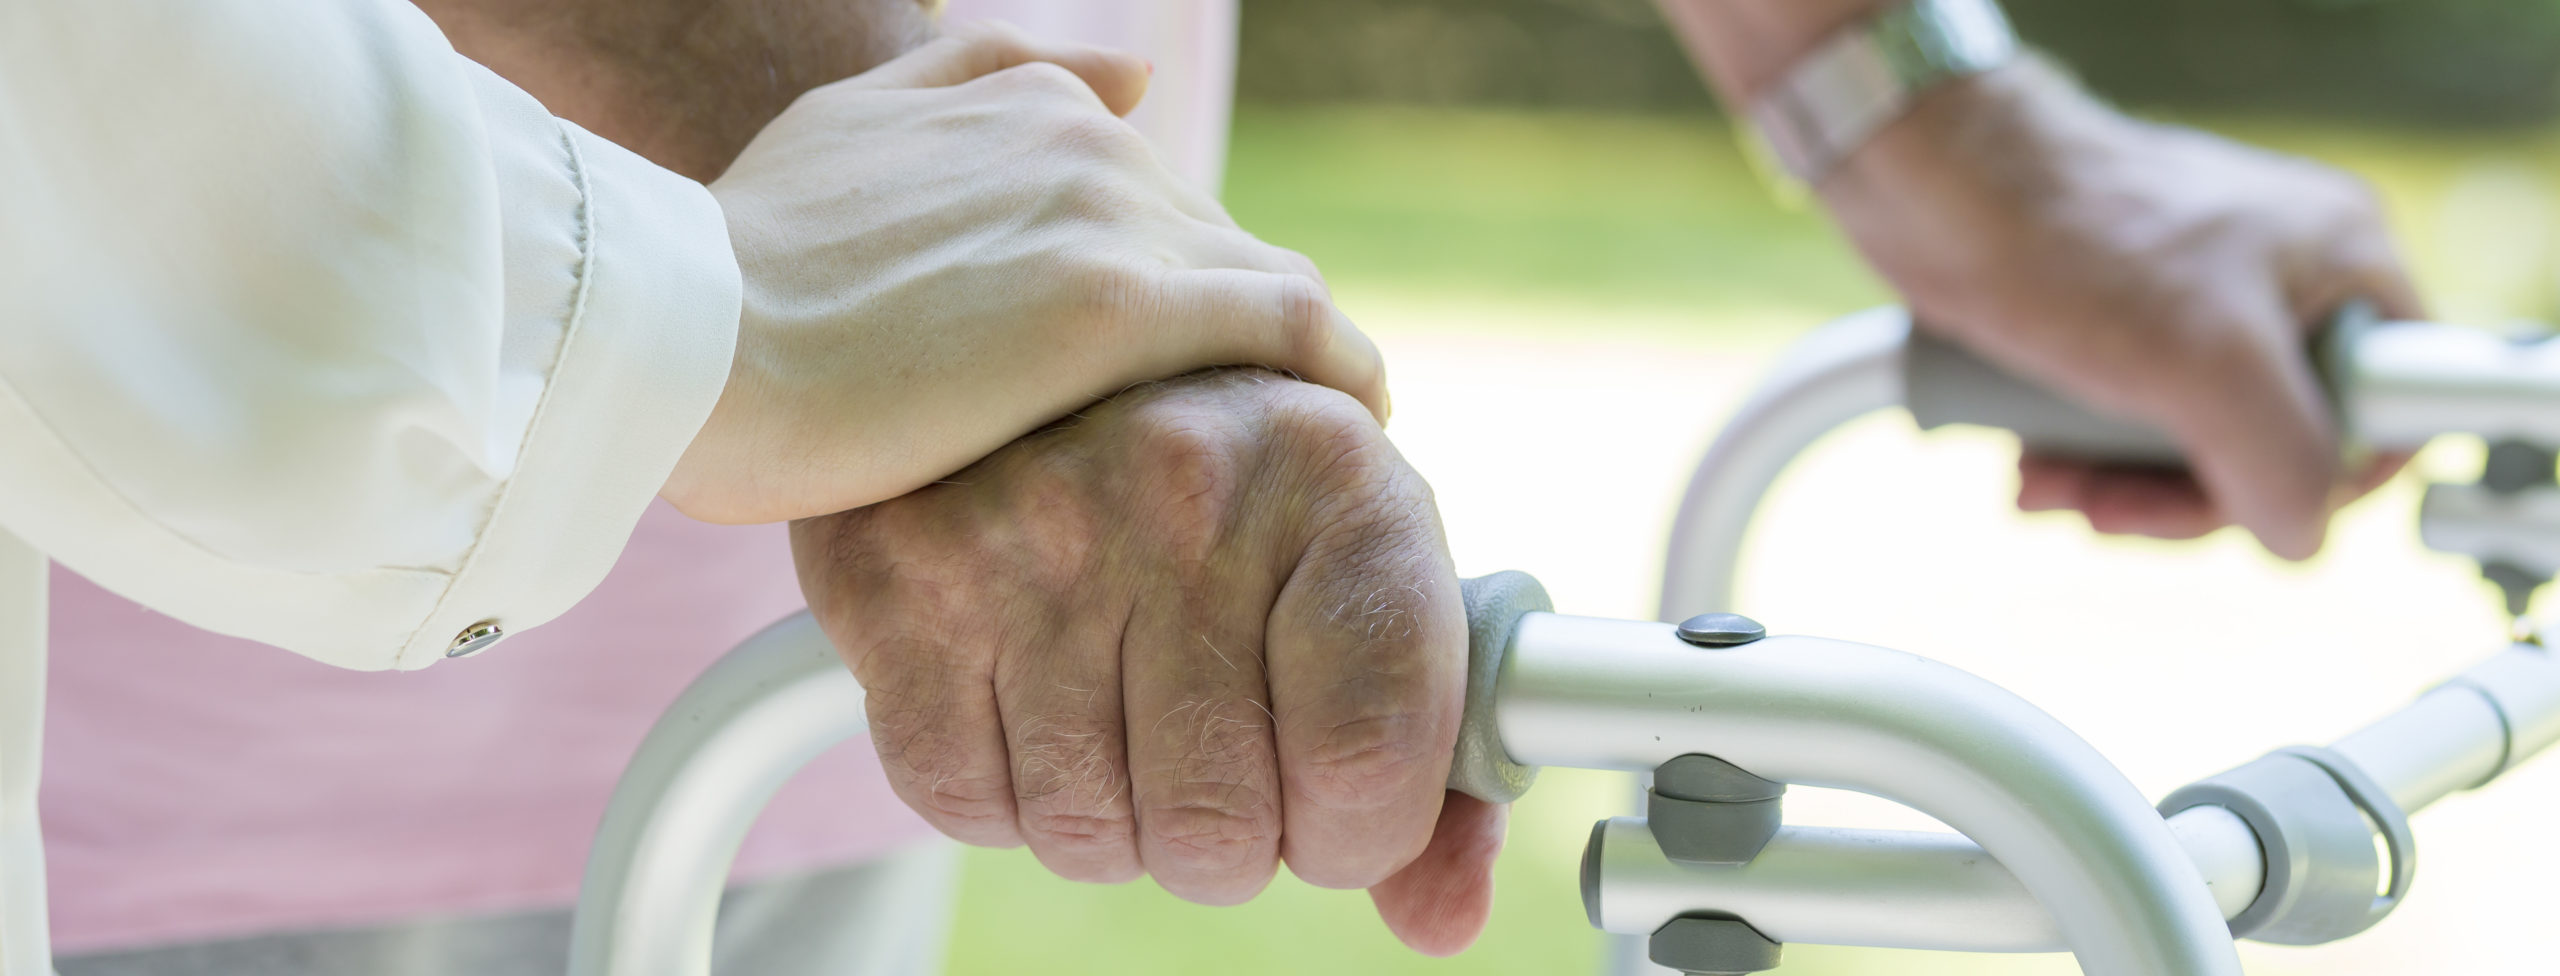 Man's hands holding the walking frame with carer support